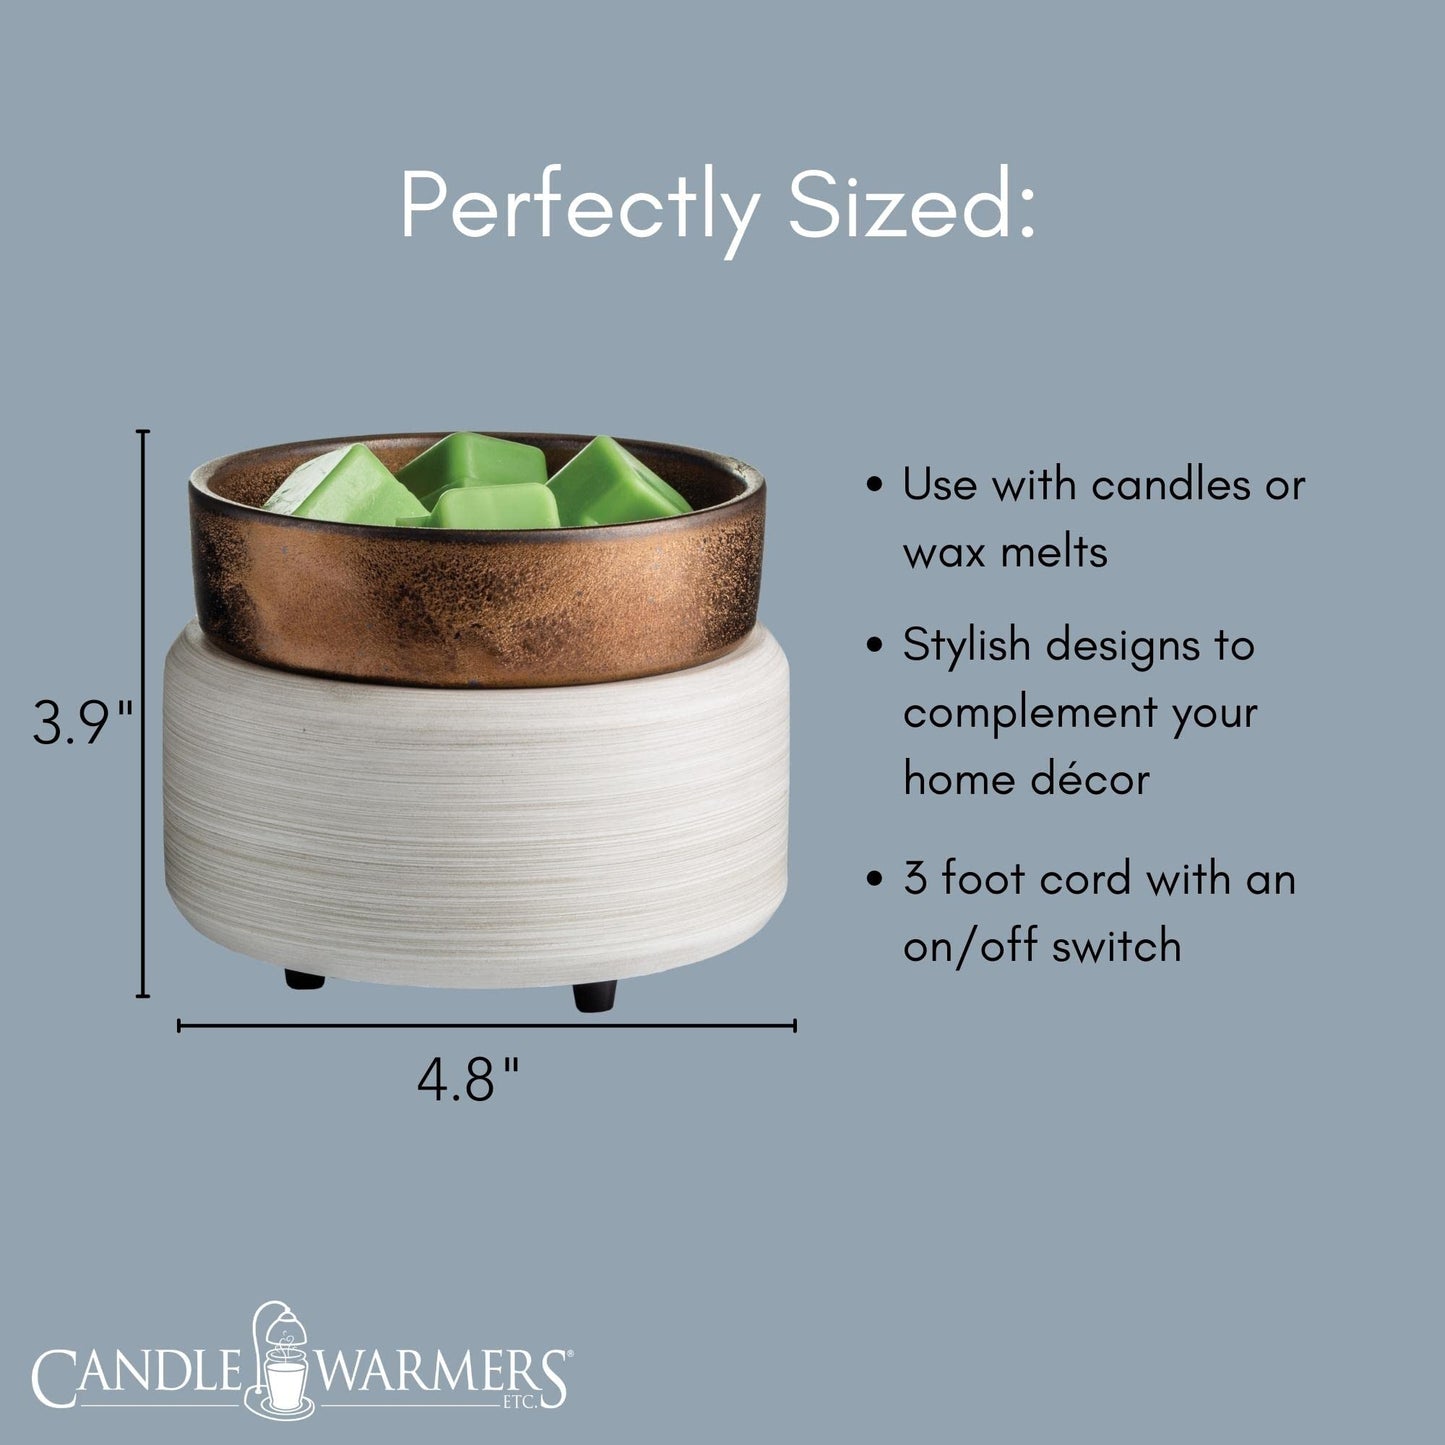 Candle Warmers Etc 2-In-1 Candle and Fragrance Wax Melt Warmer For Warming Scented Candles or Wax Melts and Tarts With To Freshen Room, Slate